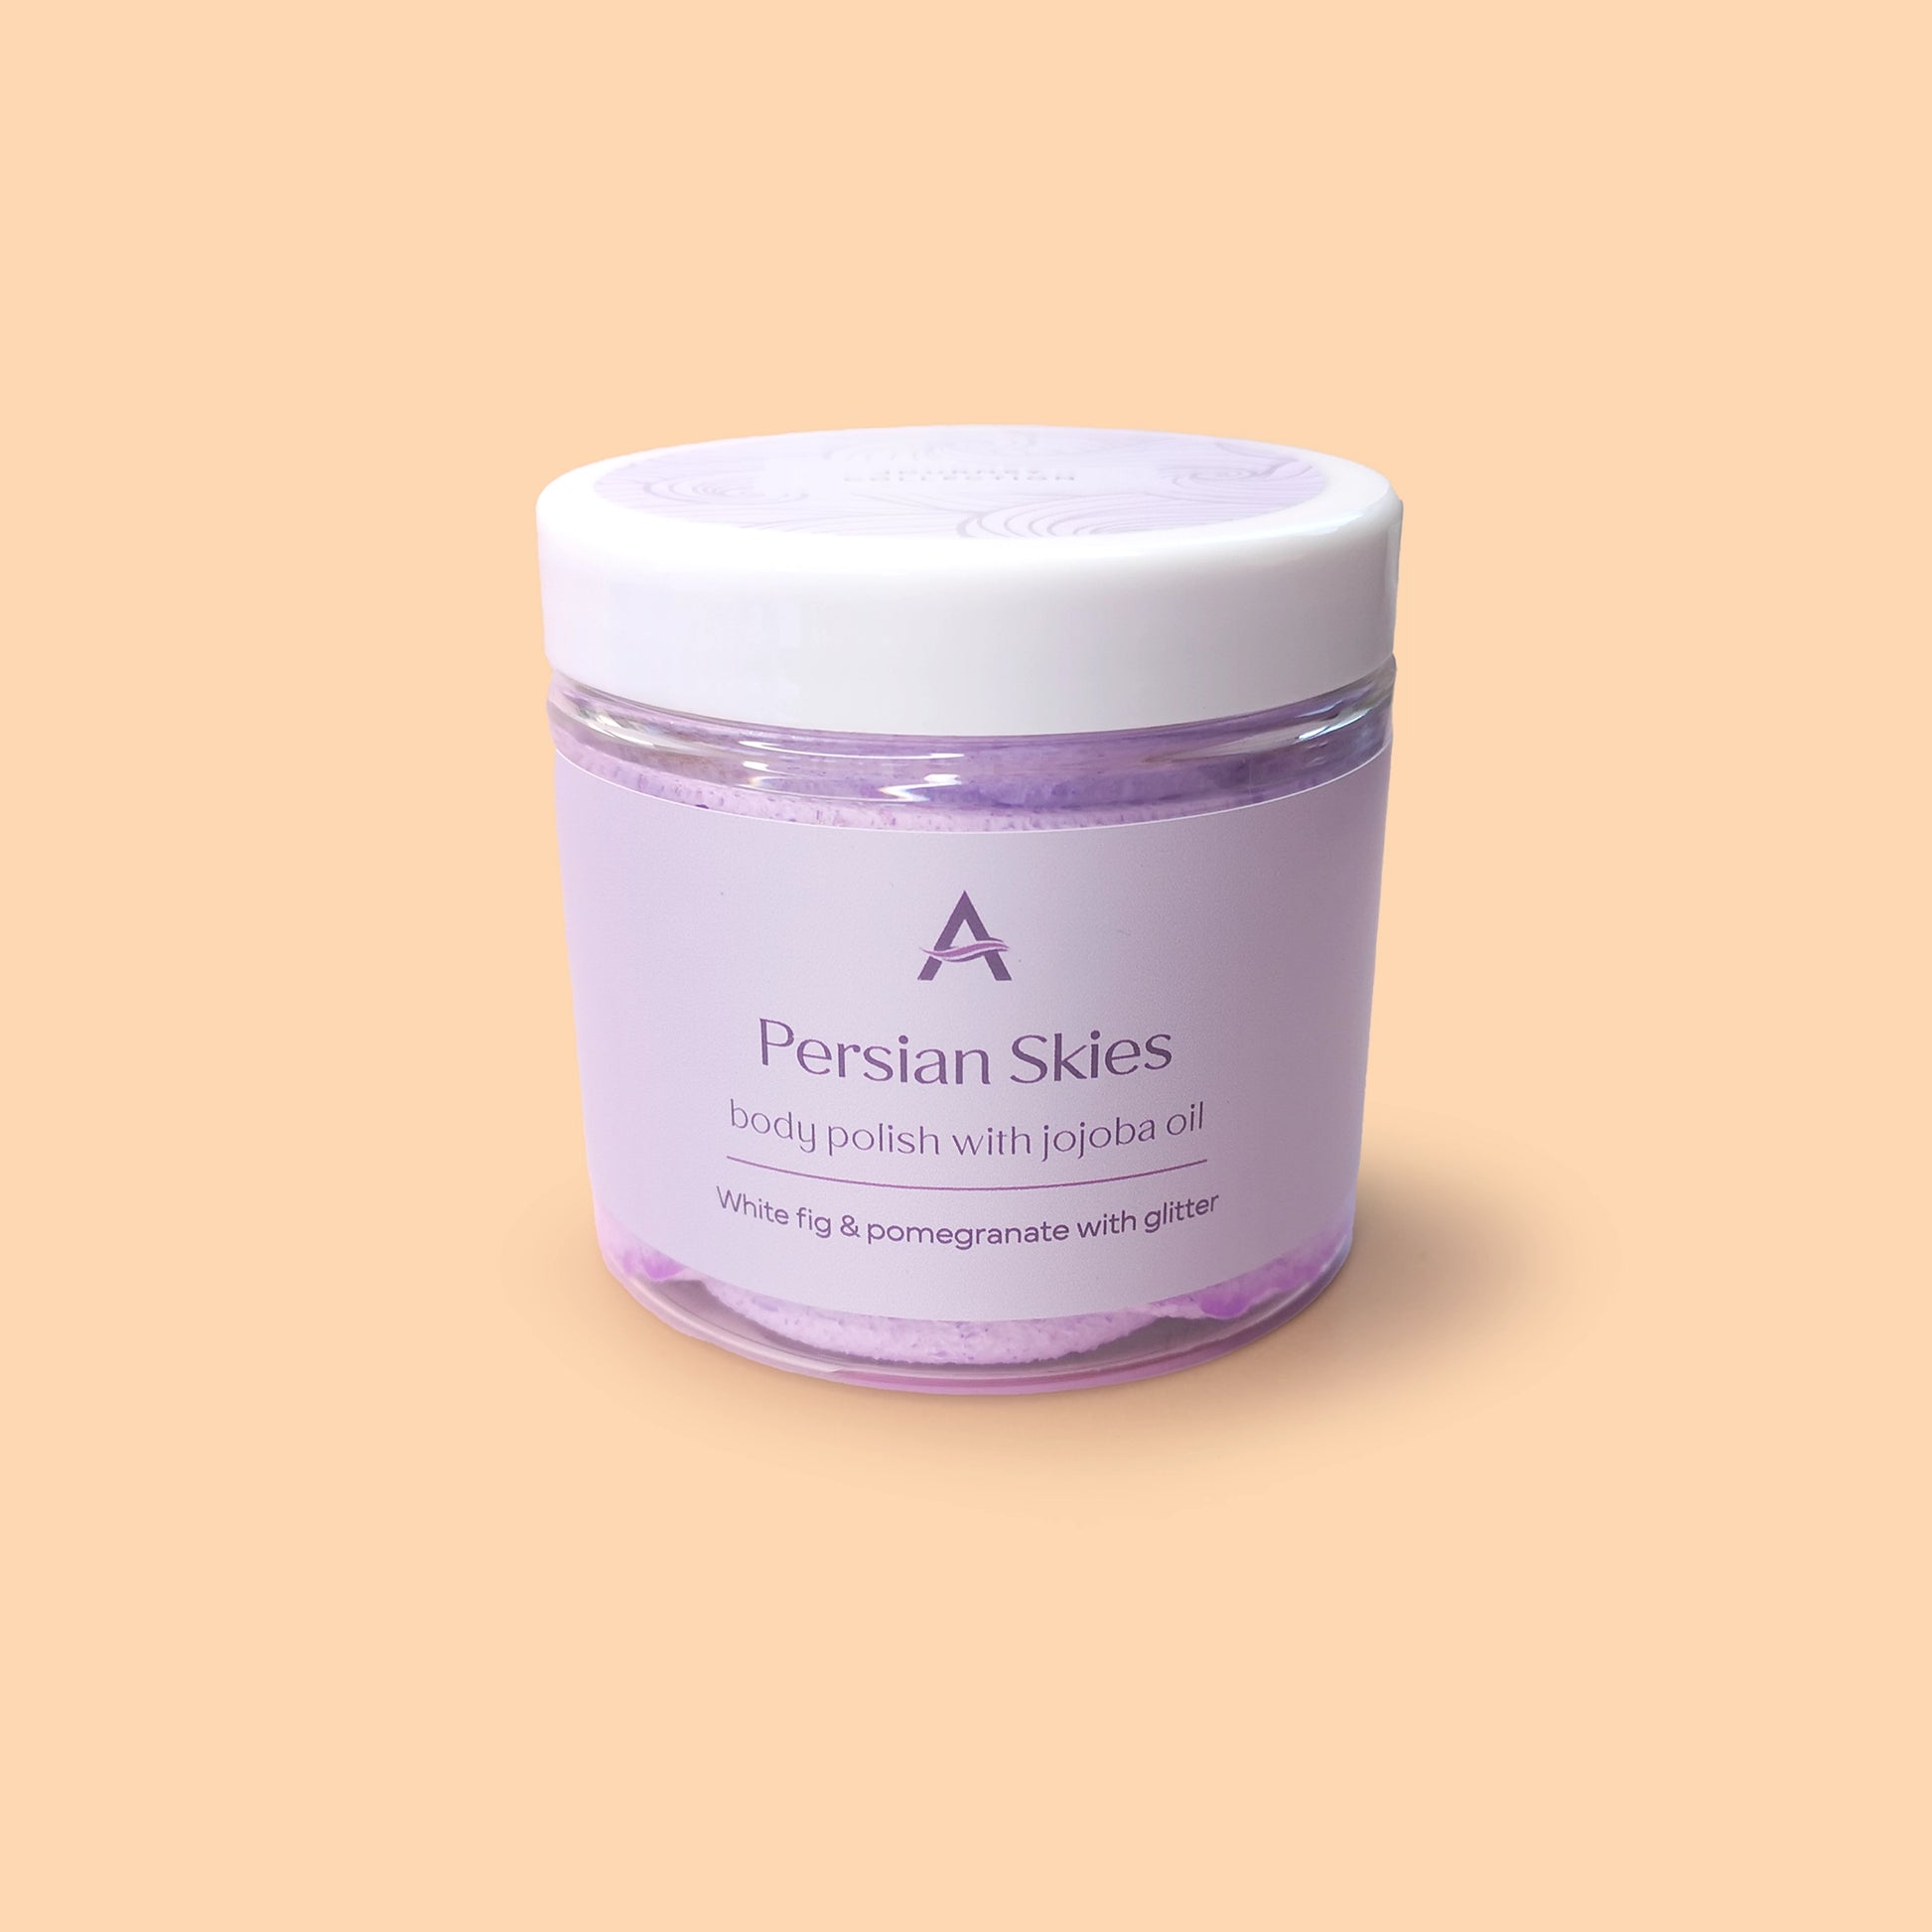 Persian Skies fig and pomegranate whipped soap body scrub pot